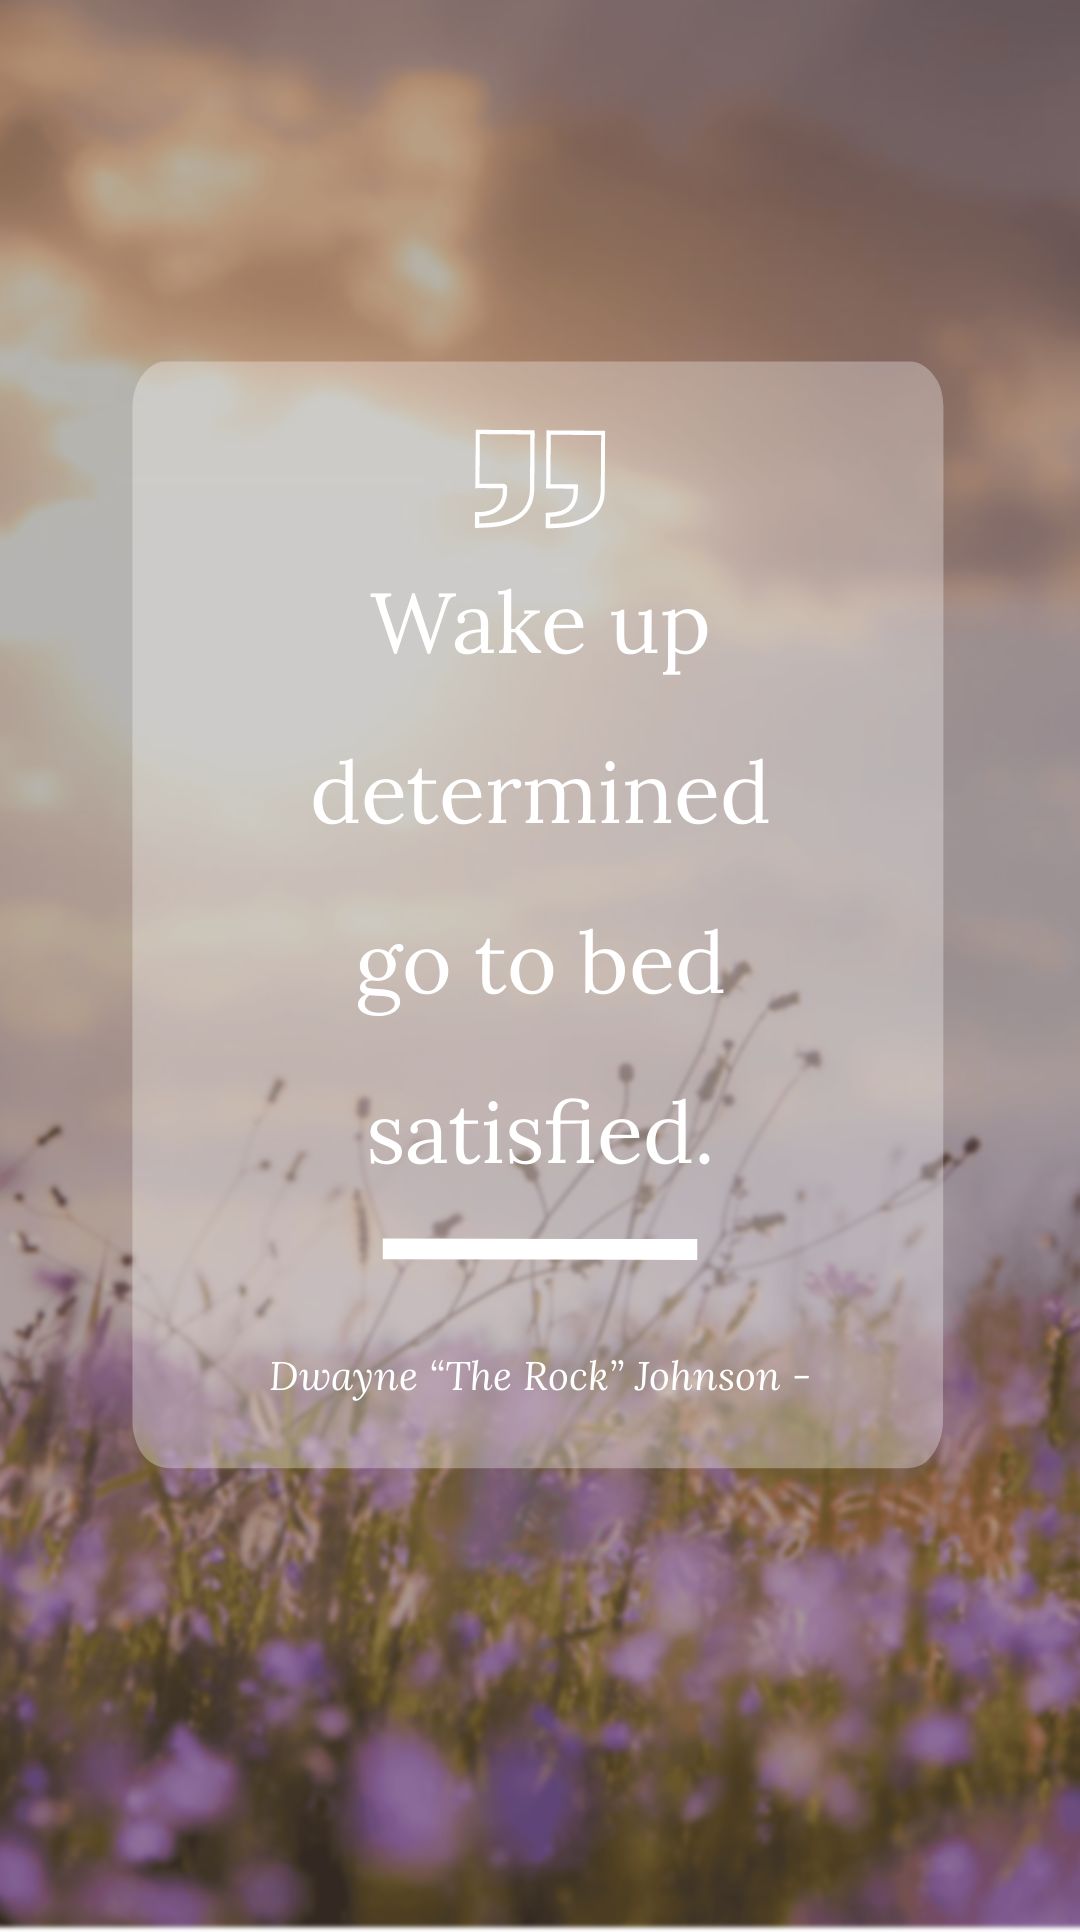 Dwayne “The Rock” Johnson - Wake up determined go to bed satisfied.